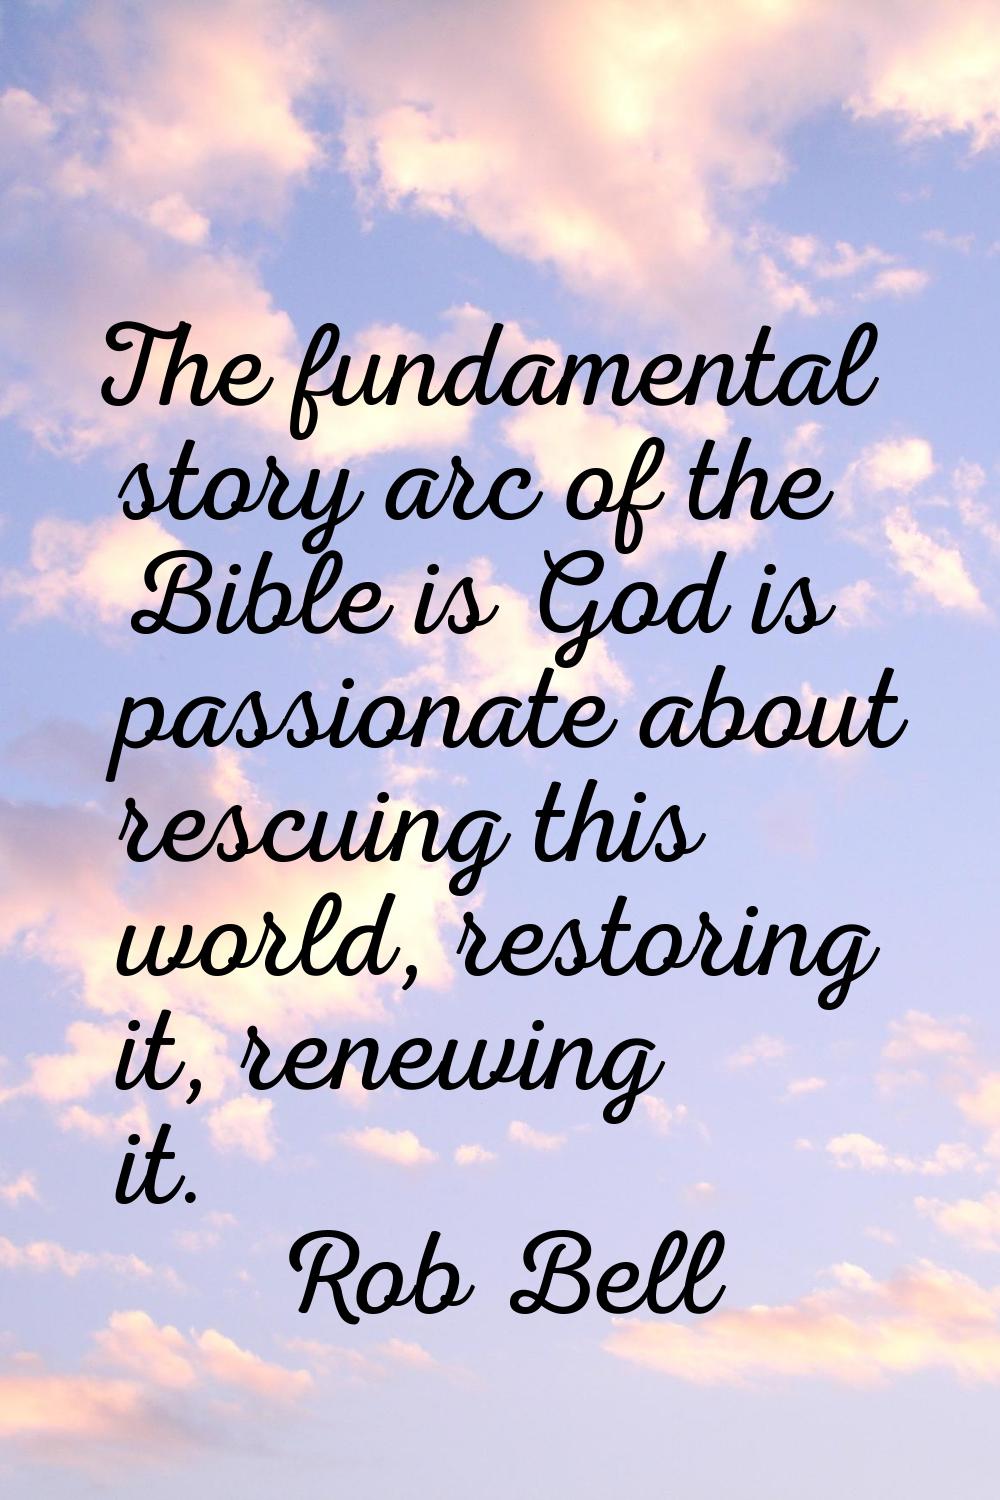 The fundamental story arc of the Bible is God is passionate about rescuing this world, restoring it